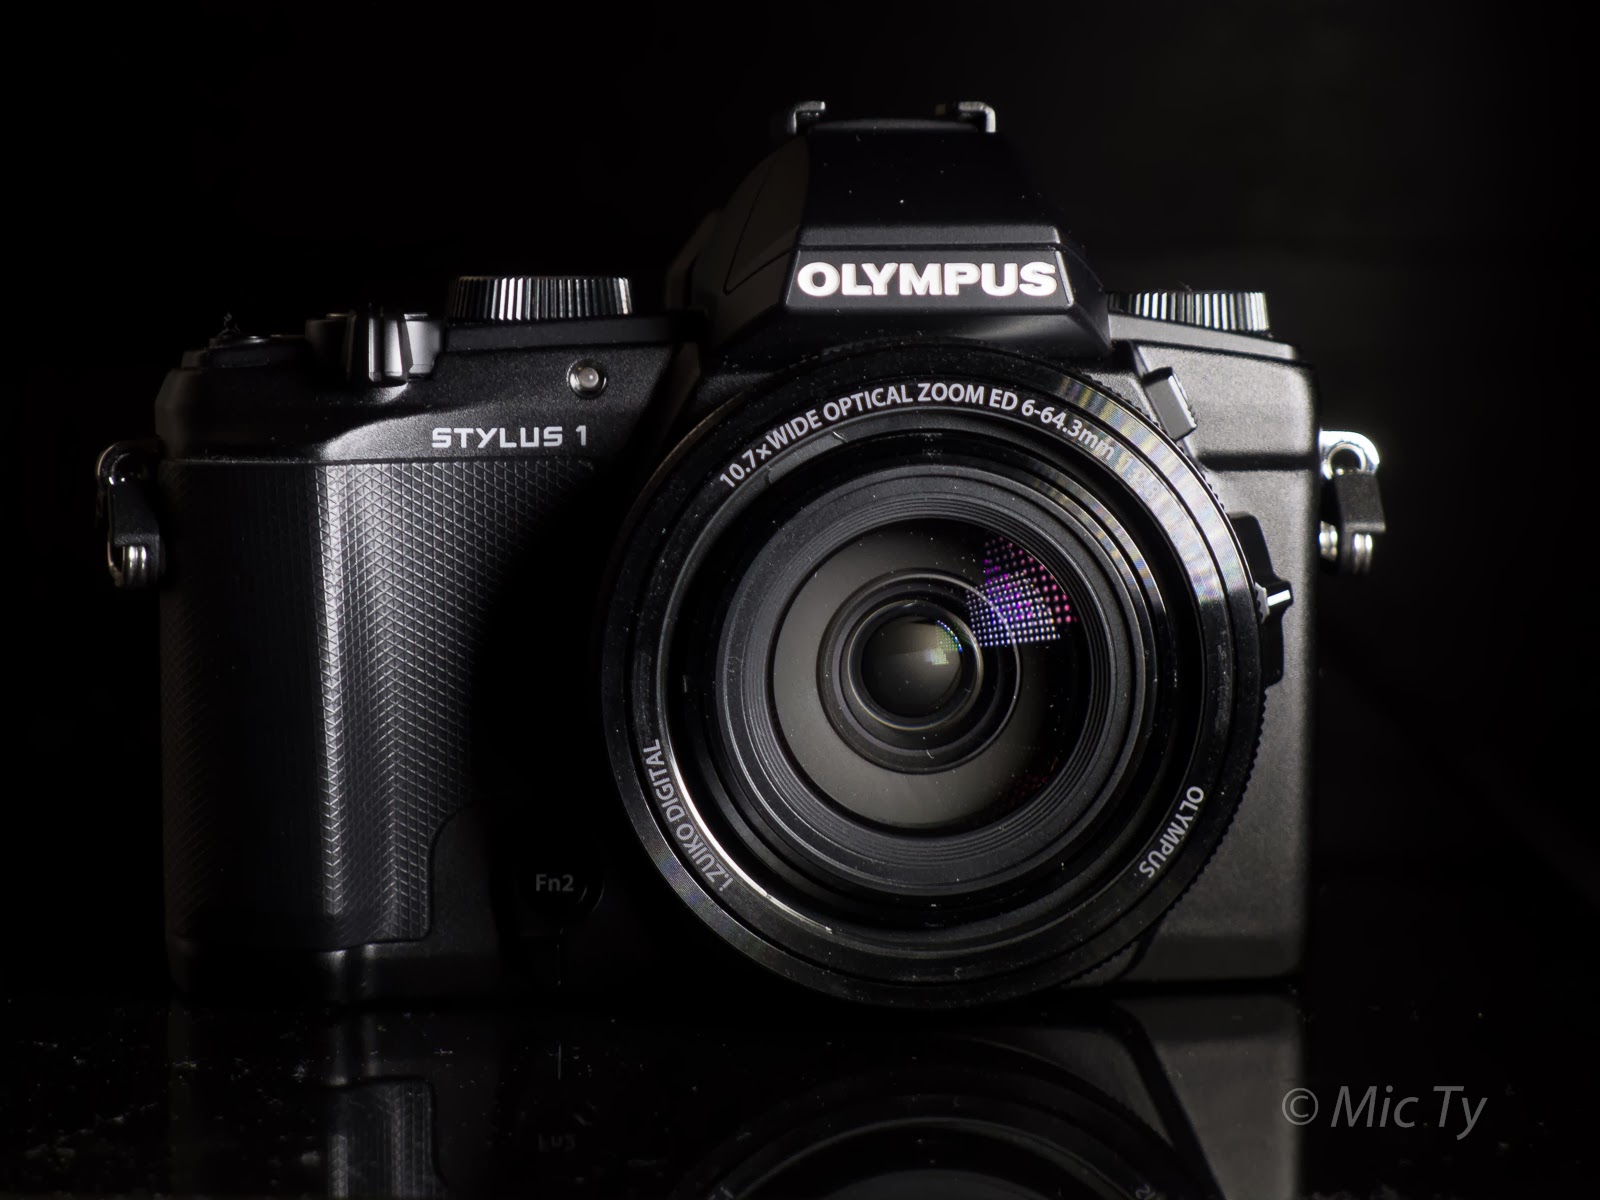 Better Family Photos: Olympus Stylus 1 Review (Part 1)